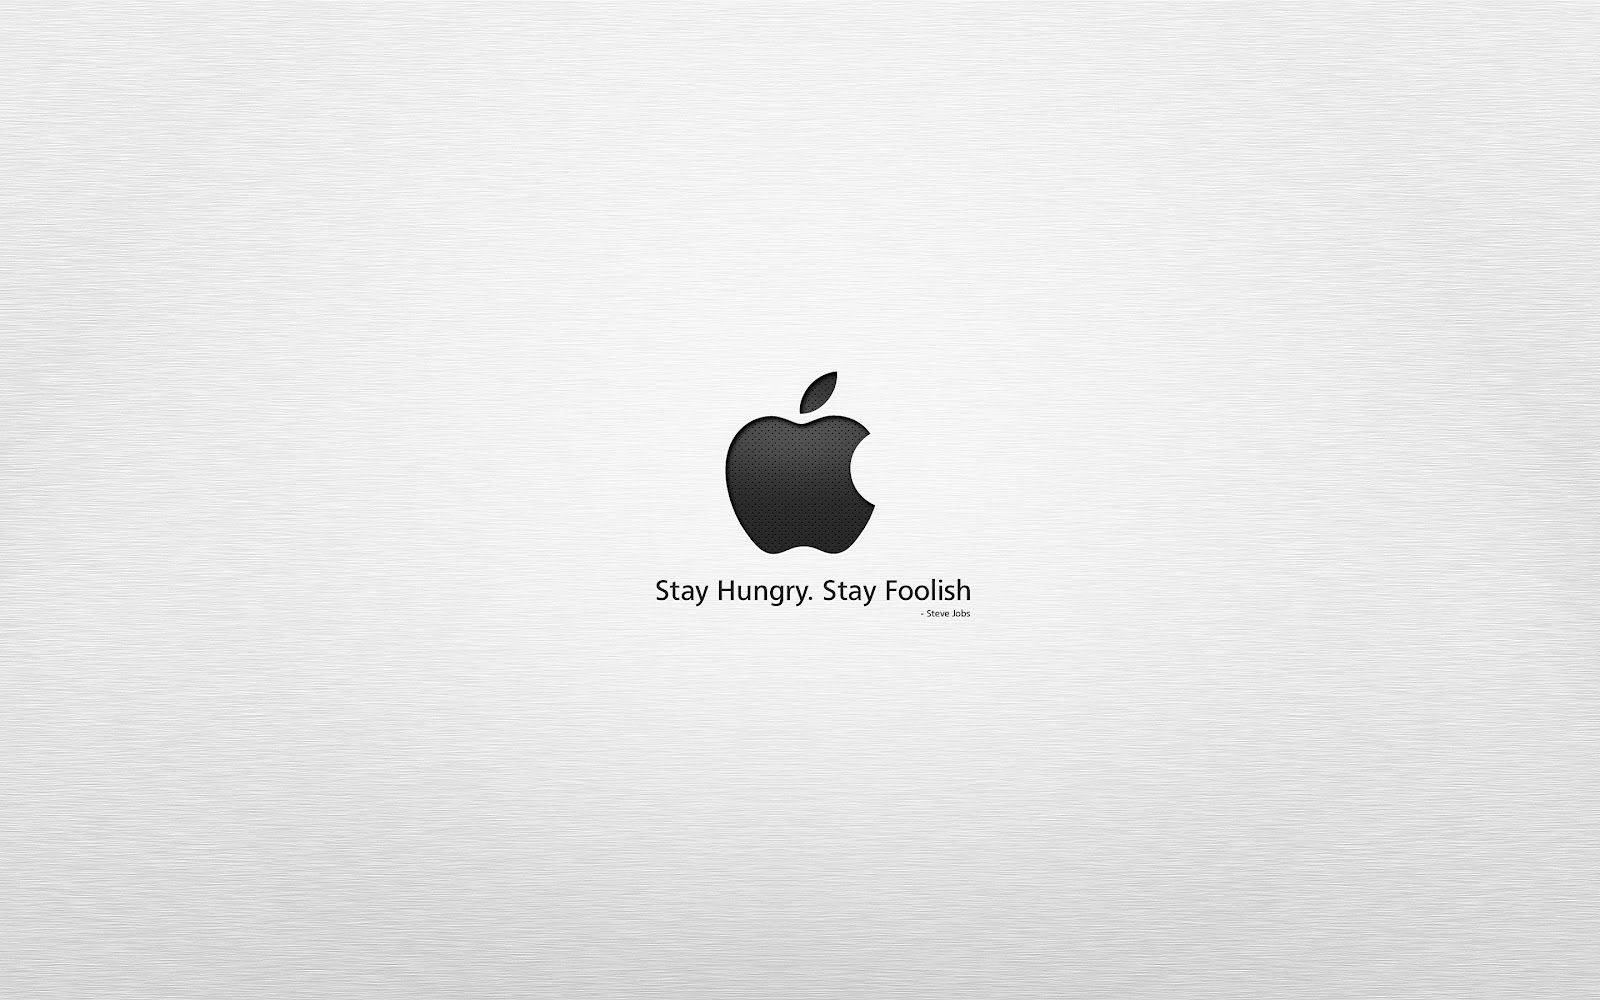 Cool Macbook Quote Background